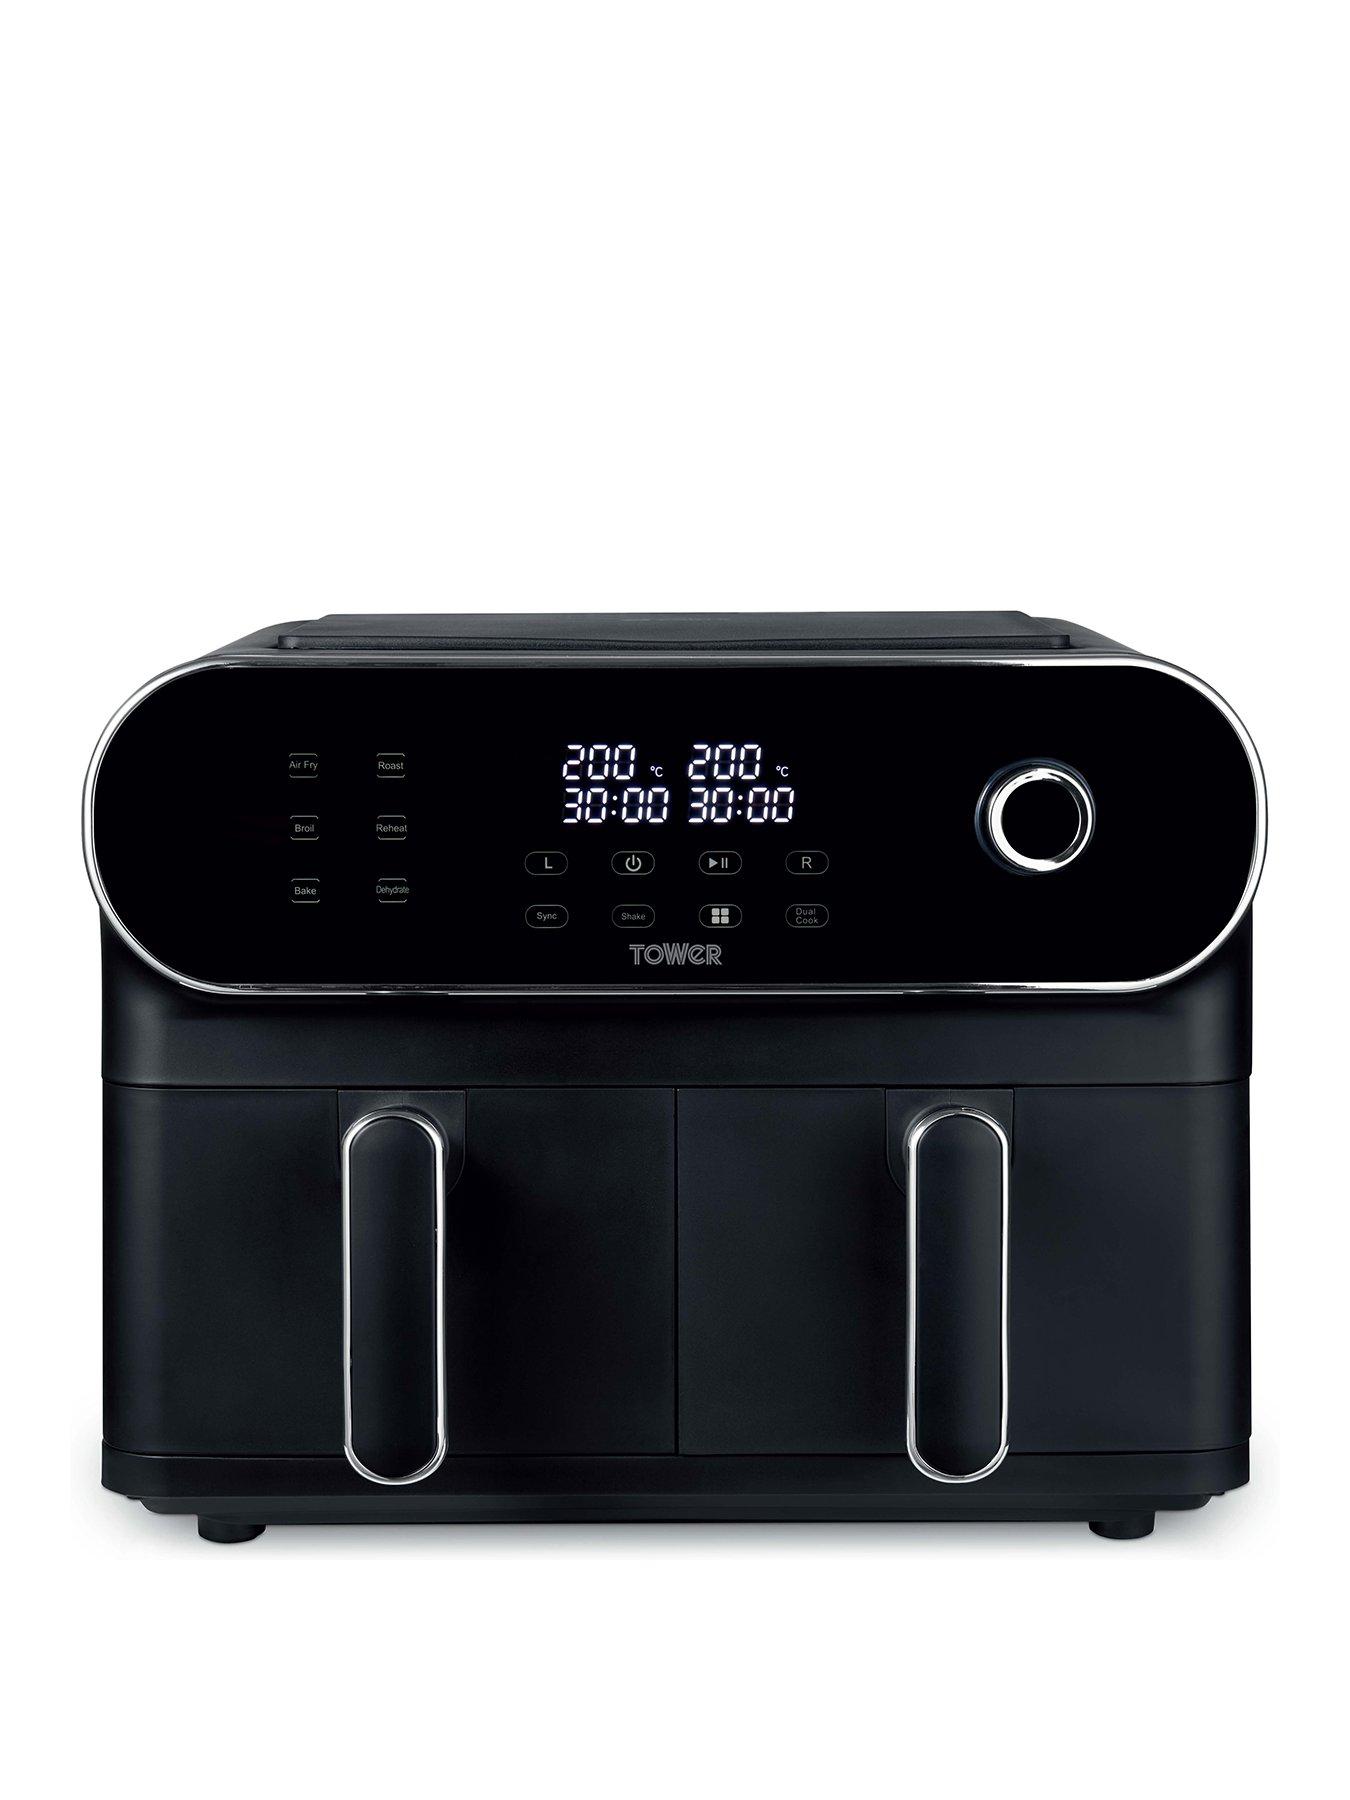 https://media.very.co.uk/i/very/VNLLQ_SQ1_0000000099_N_A_SLf/tower-104l-vortx-dual-basket-air-fryer-with-smart-finish-technology-nbsplarge-capacity-t17144.jpg?$180x240_retinamobilex2$&$roundel_very$&p1_img=sale_2017